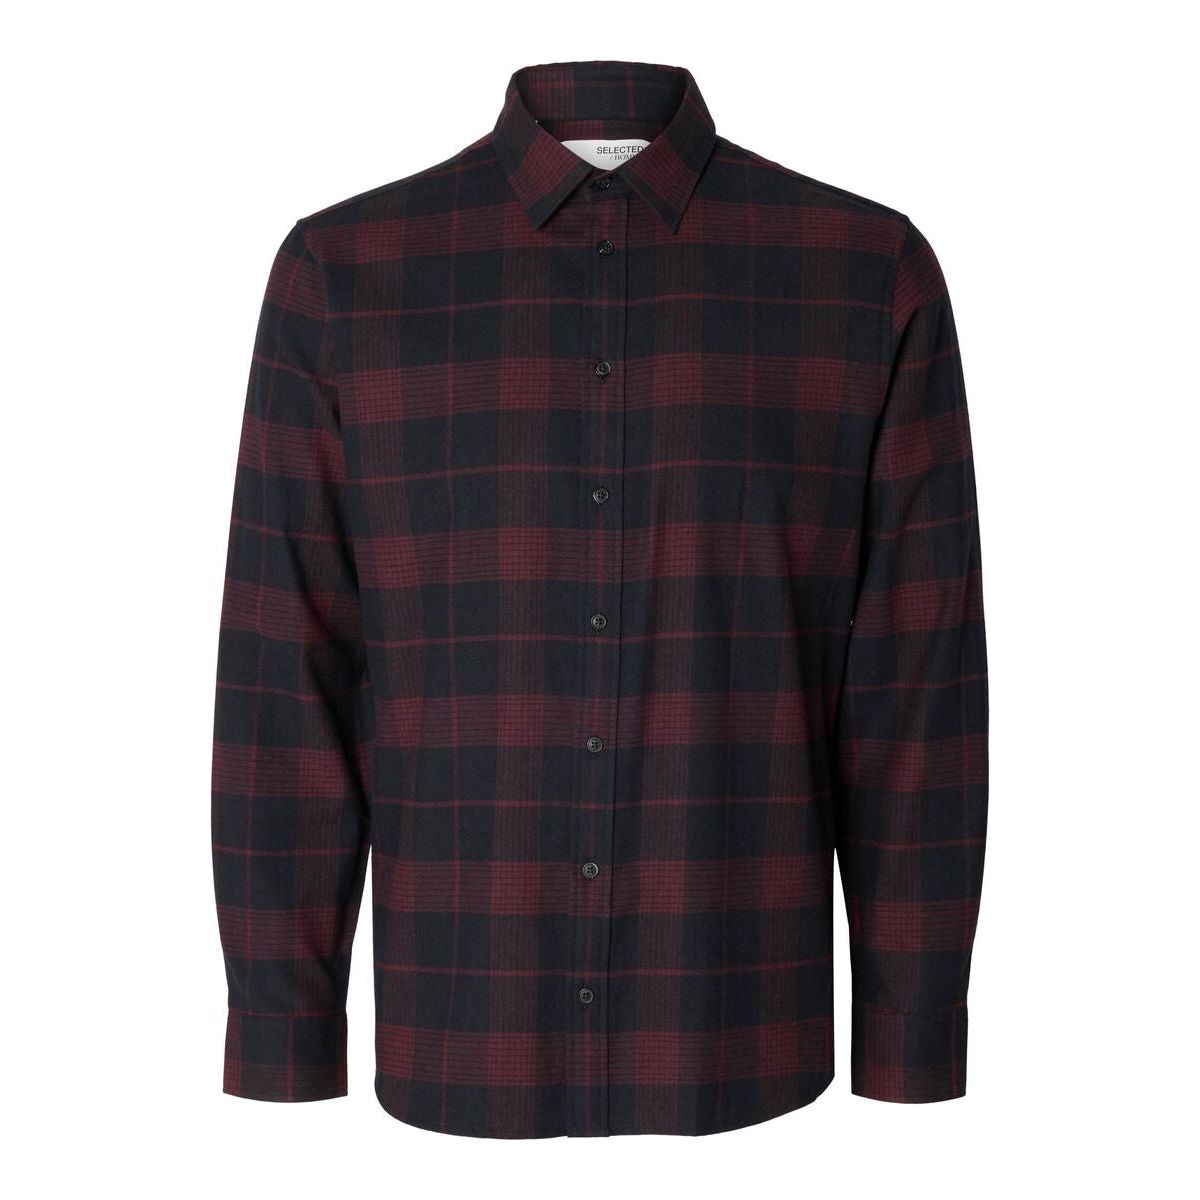 Selected Homme - Flannel Shirt - Royale/ Checks